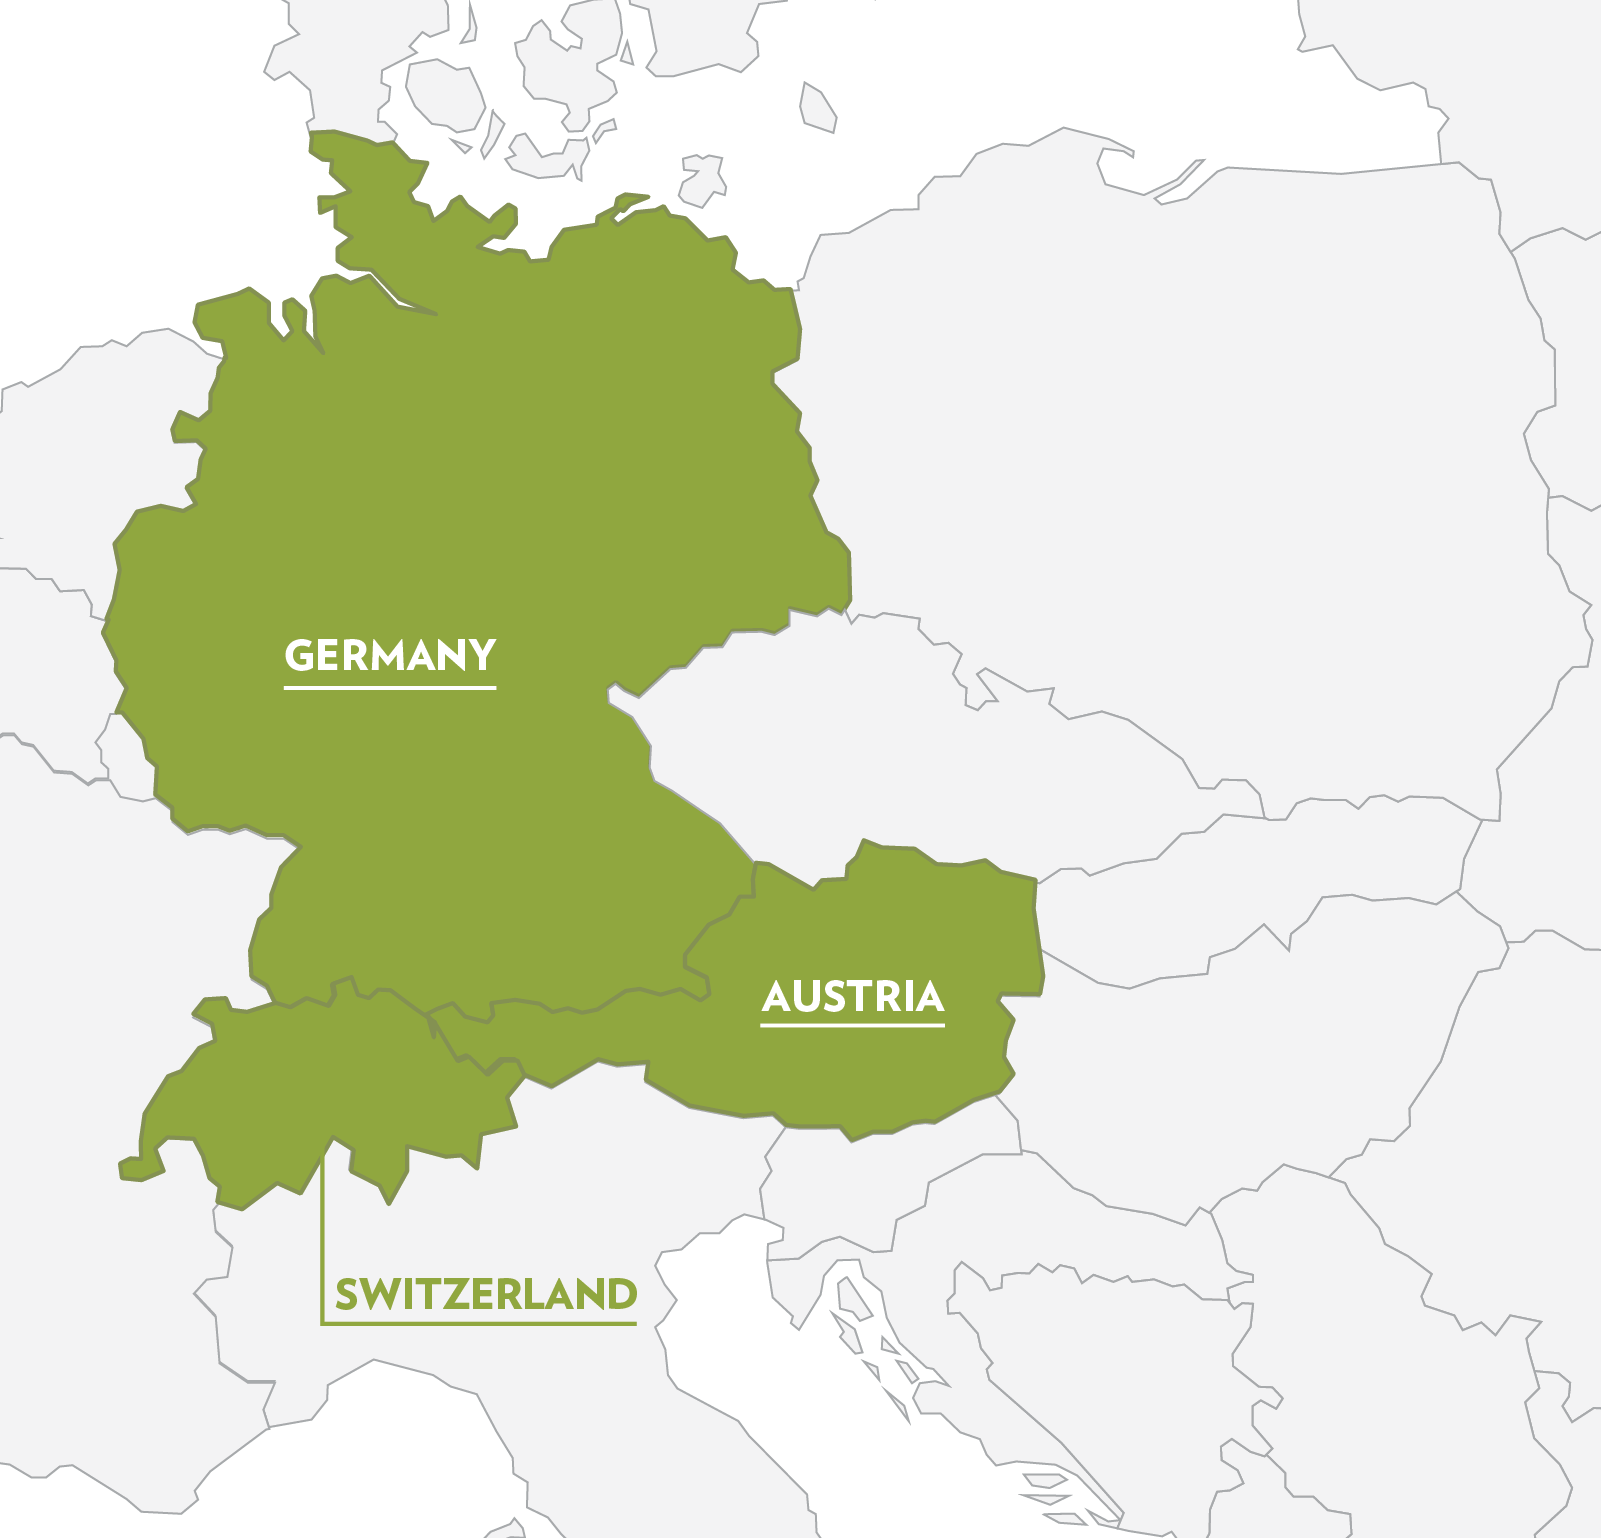 Map Of Austria Switzerland And Germany - Maps of the World